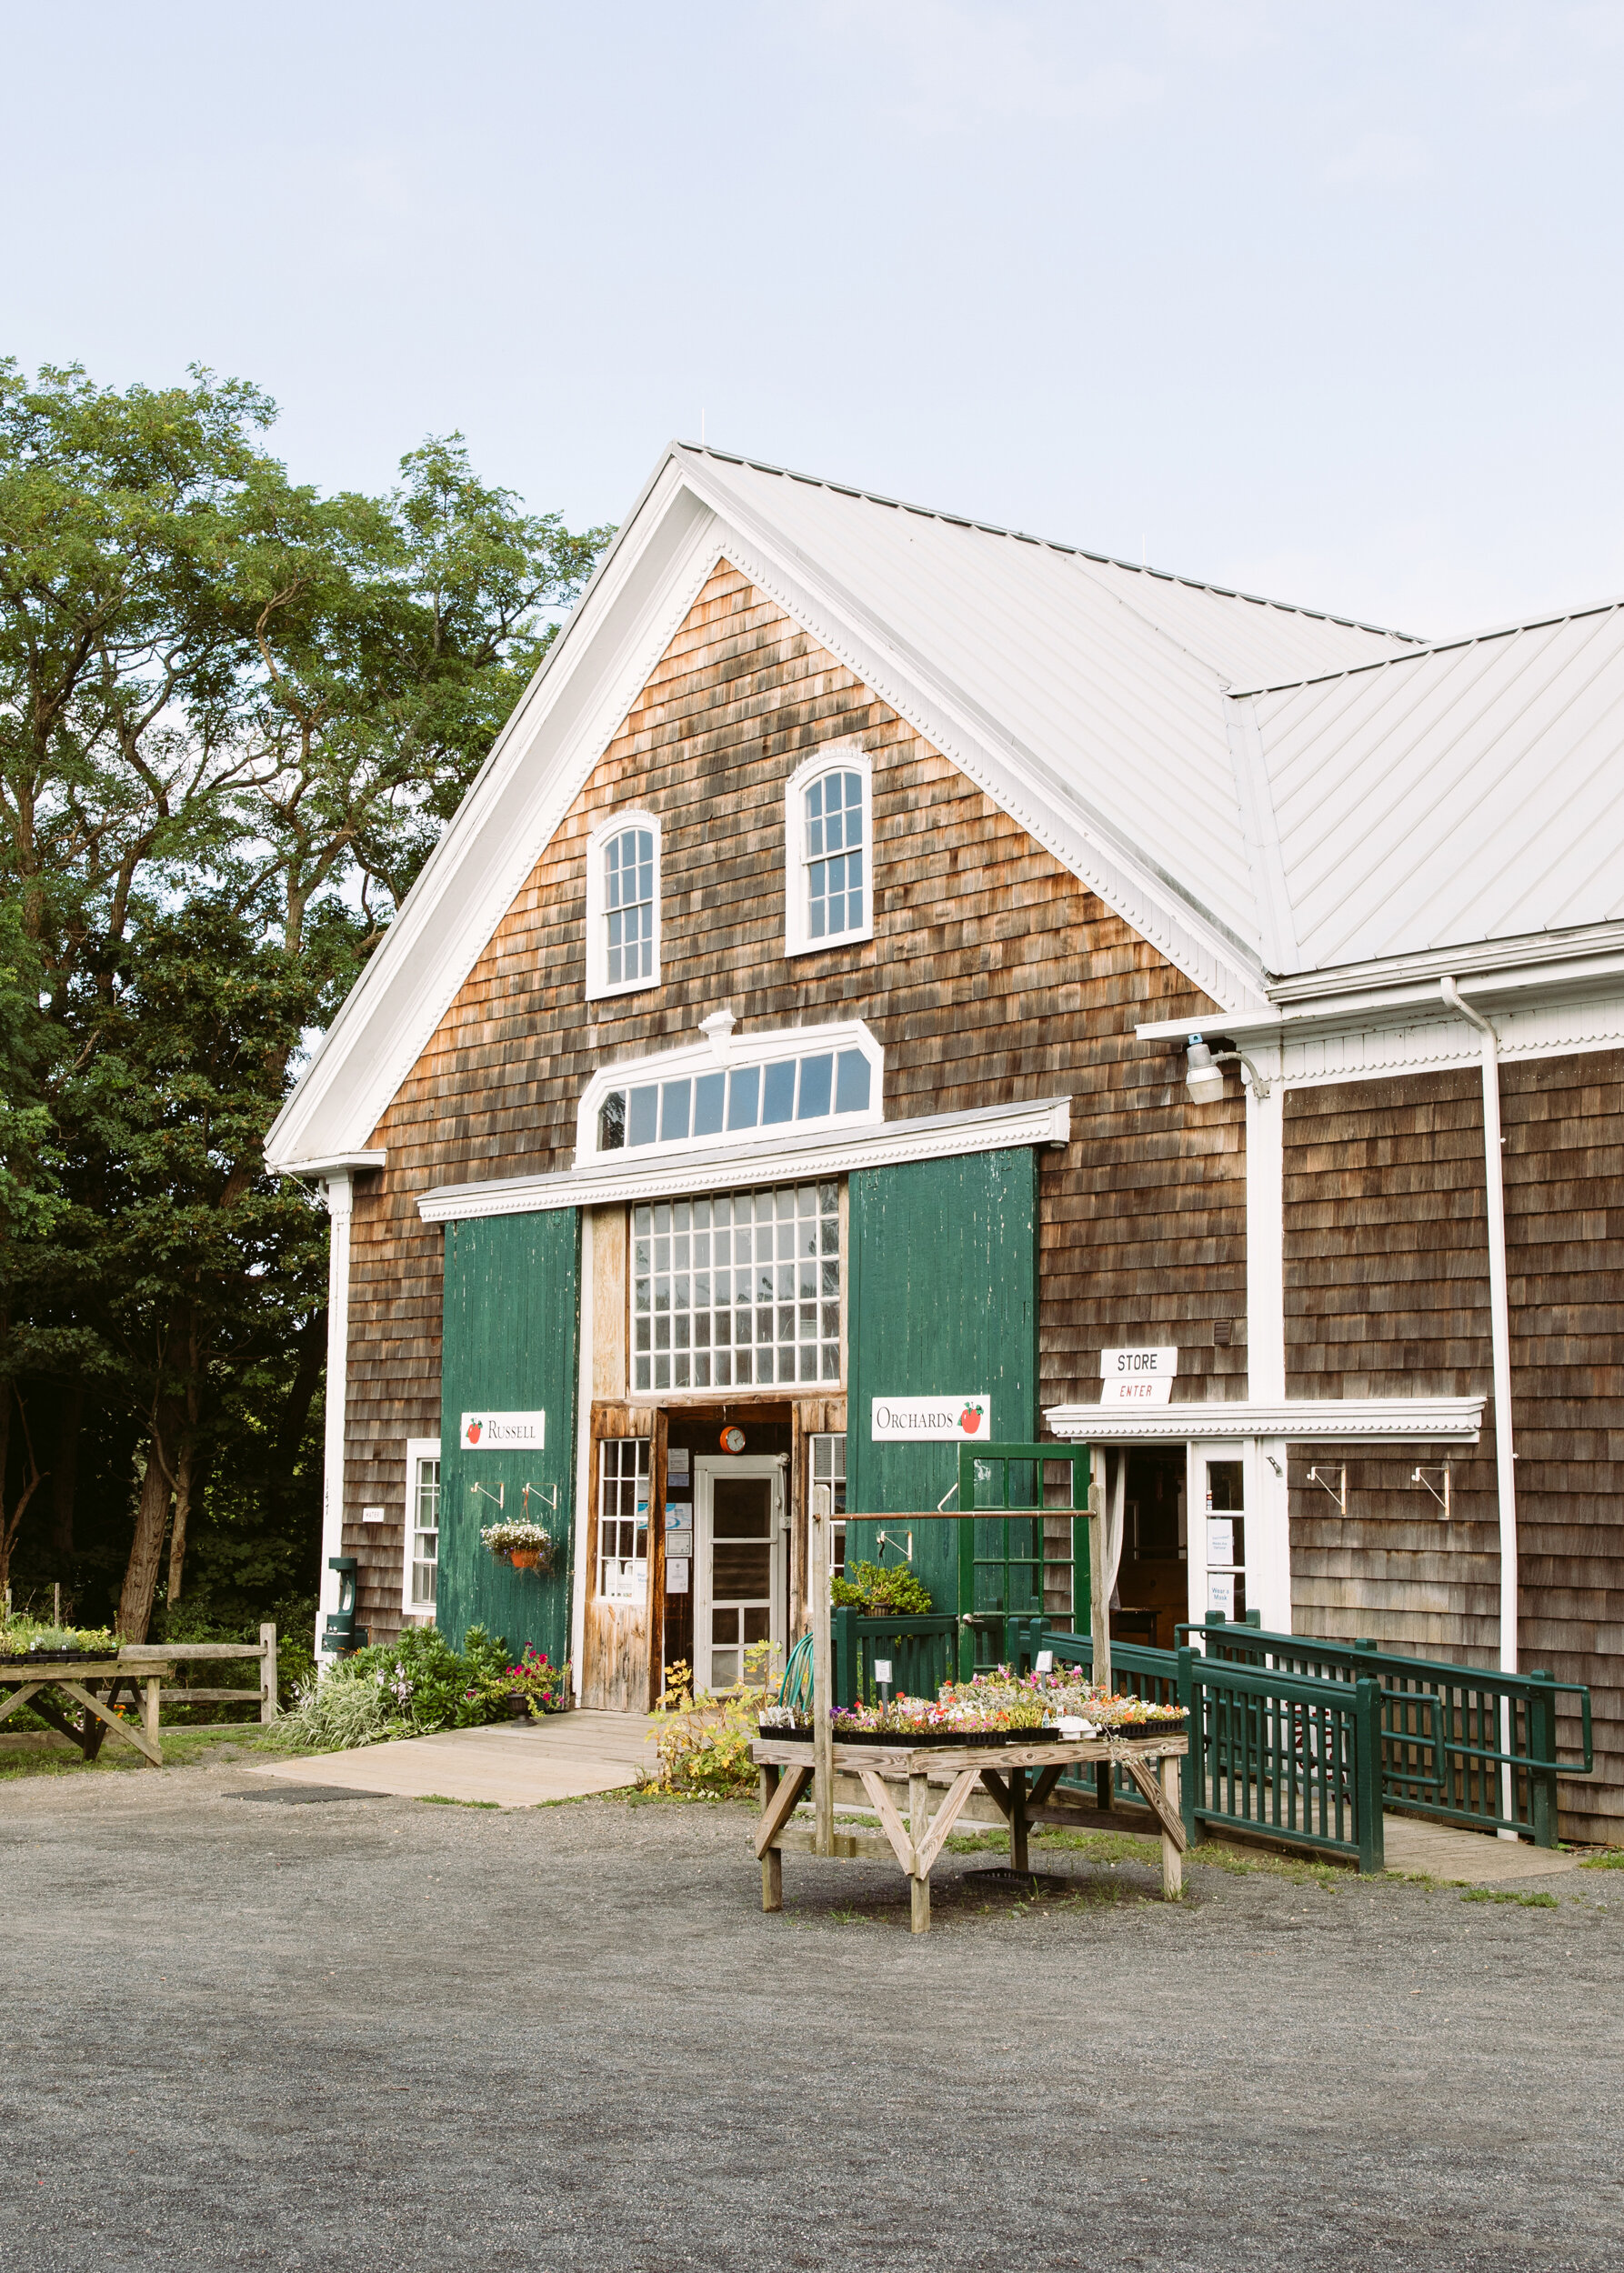 Russell's farm store